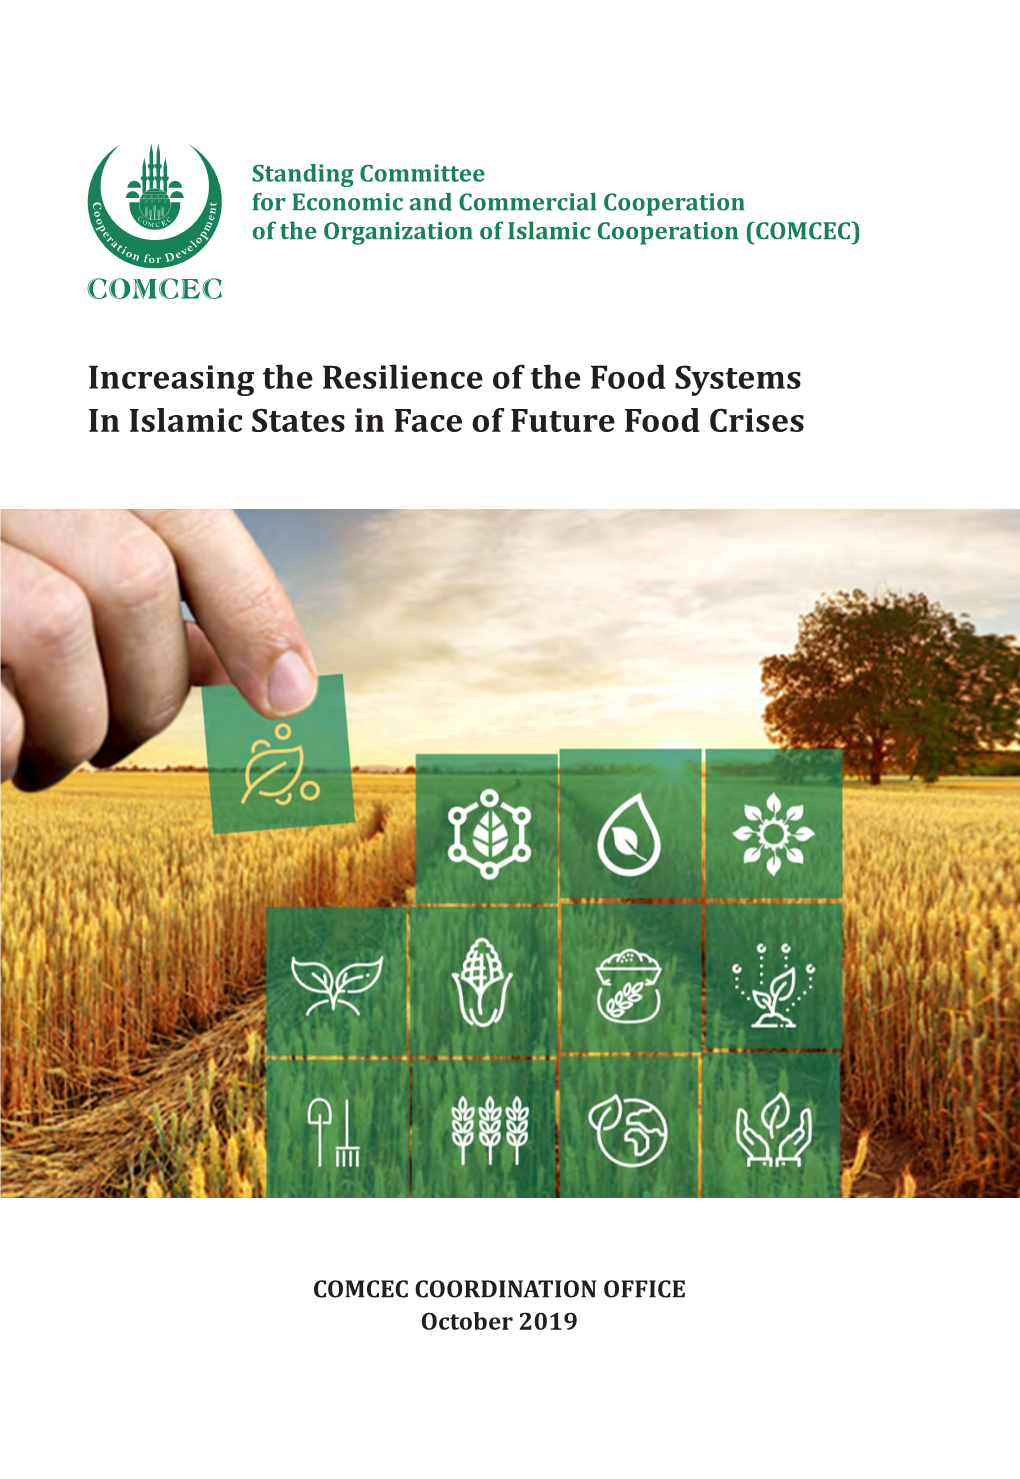 Increasing the Resilience of the Food Systems in Islamic States in Face Of